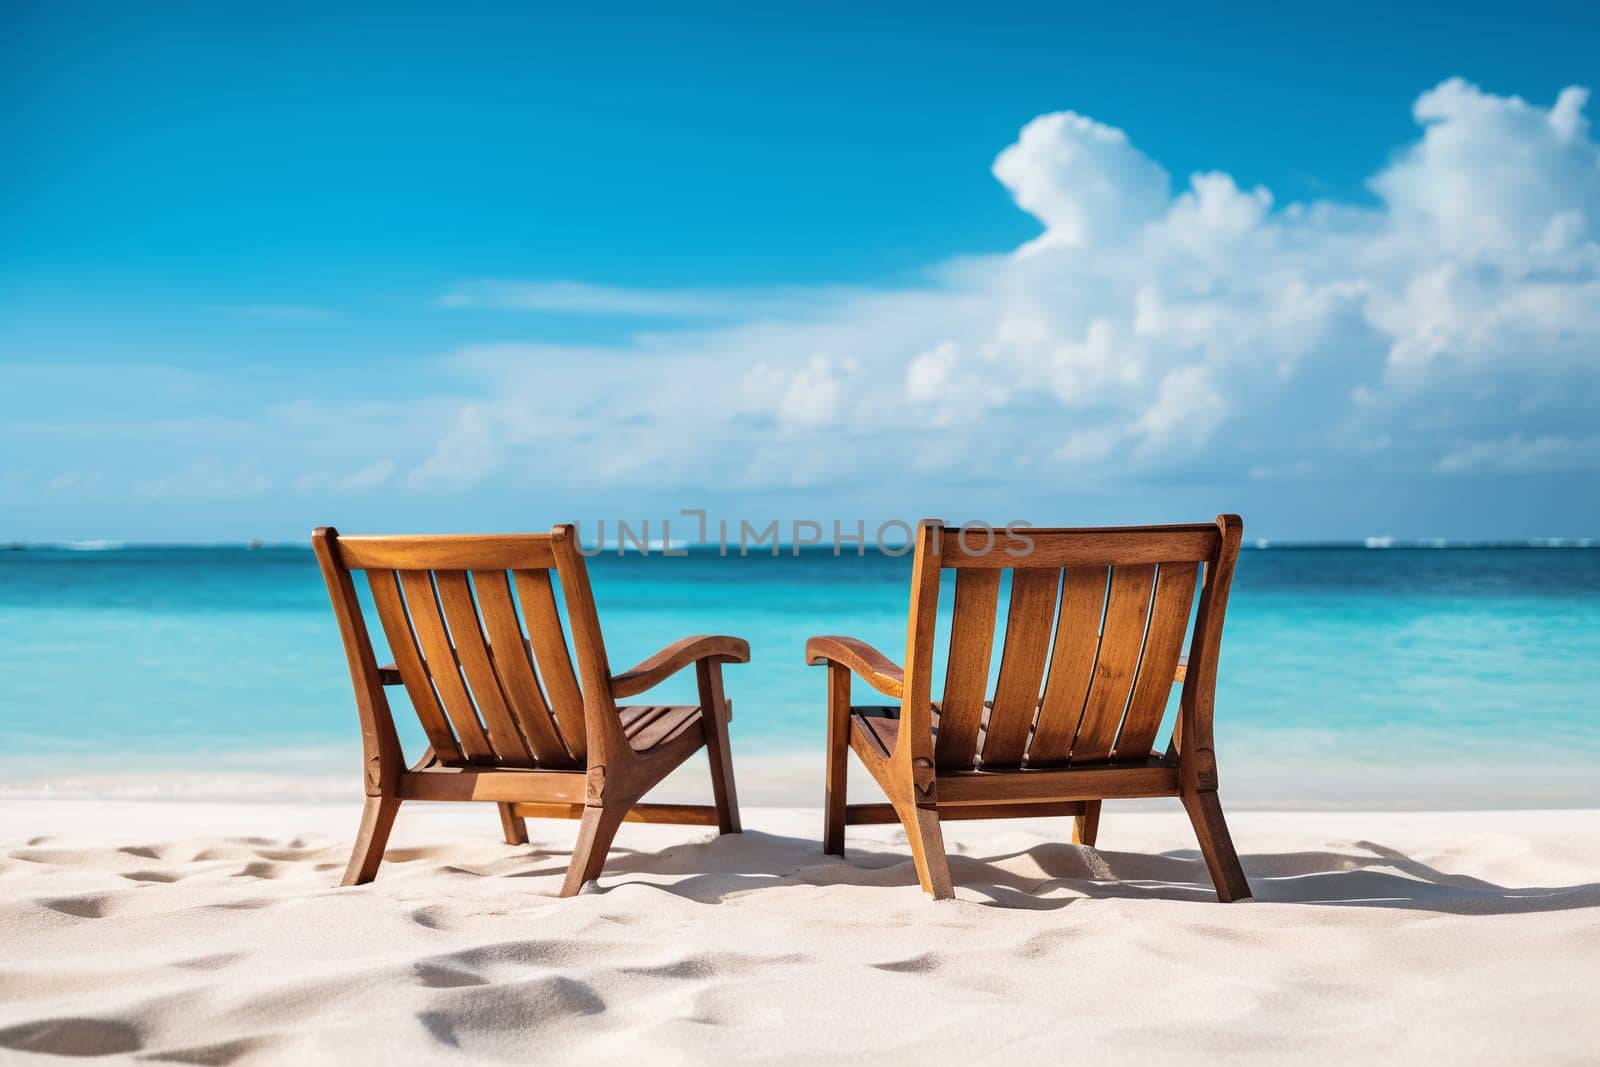 Serene Seaside Escape: Two Chairs on a Sunny Beach by chrisroll